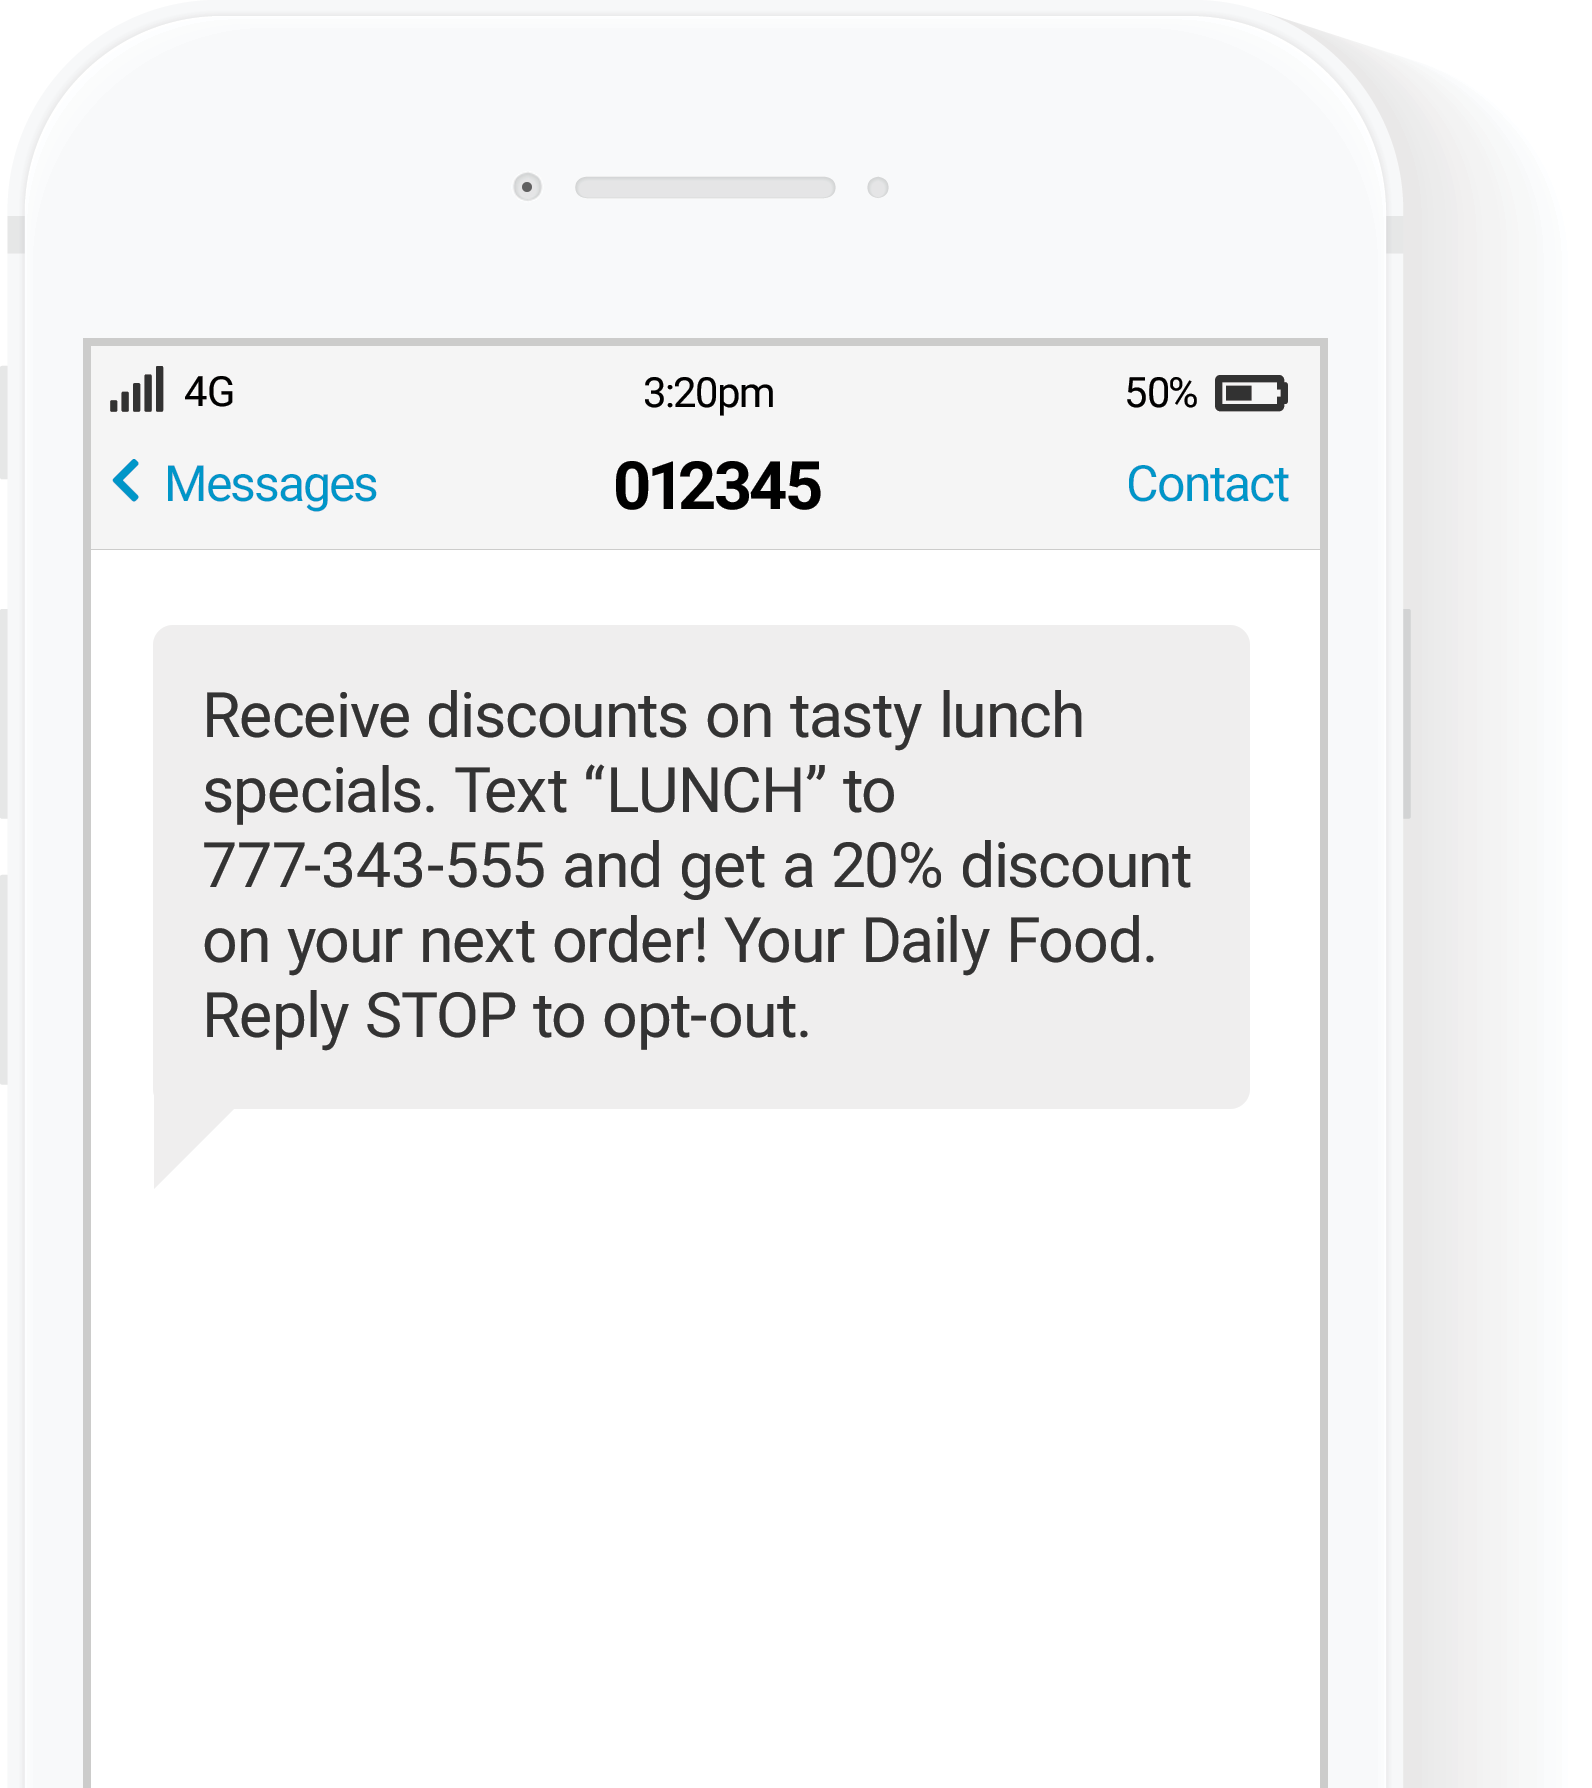 odoo sms marketing text message